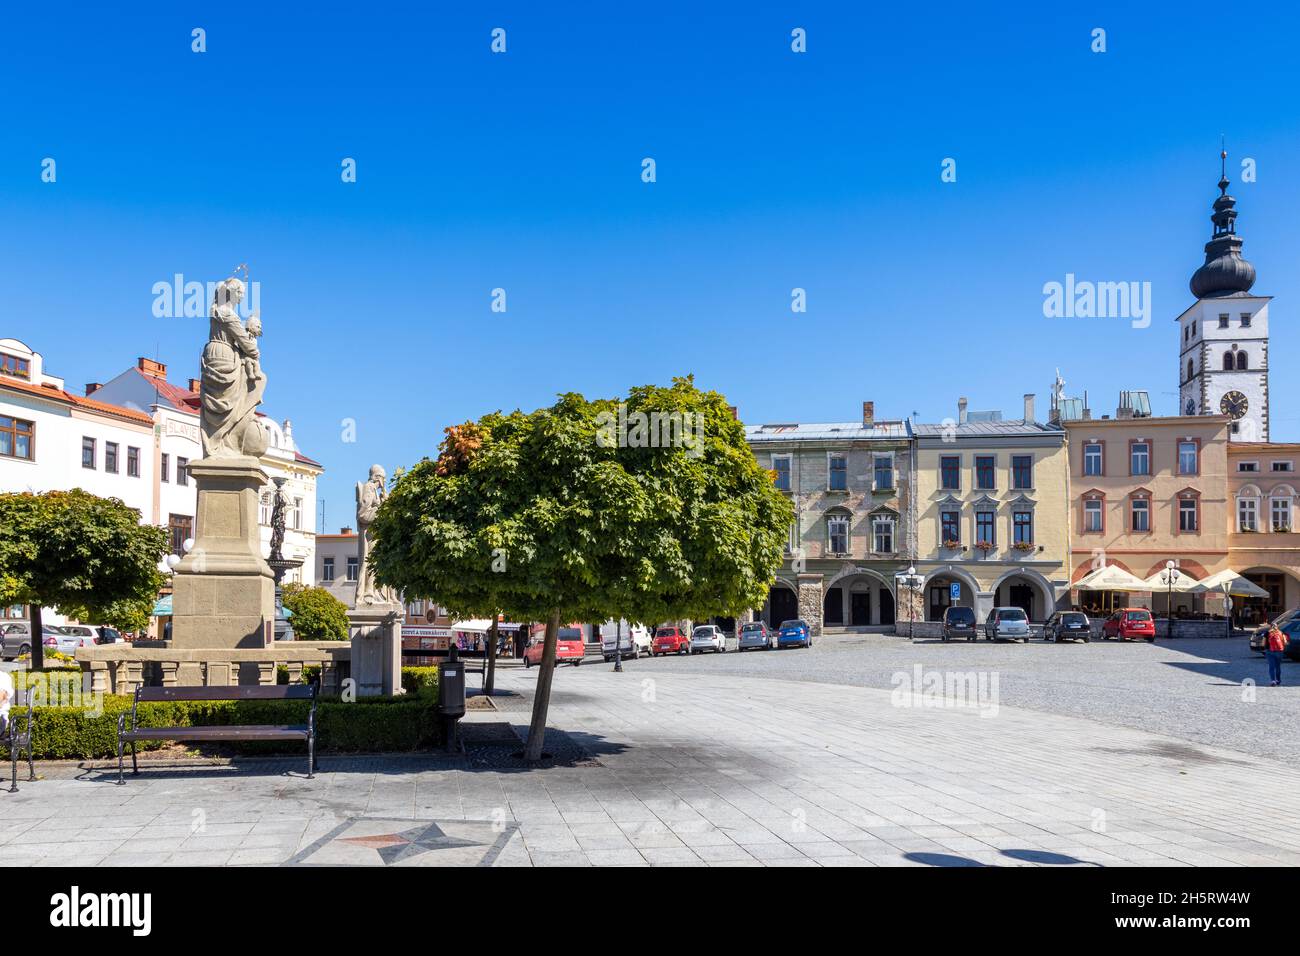 Sigmund freud square hi-res stock photography and images - Alamy